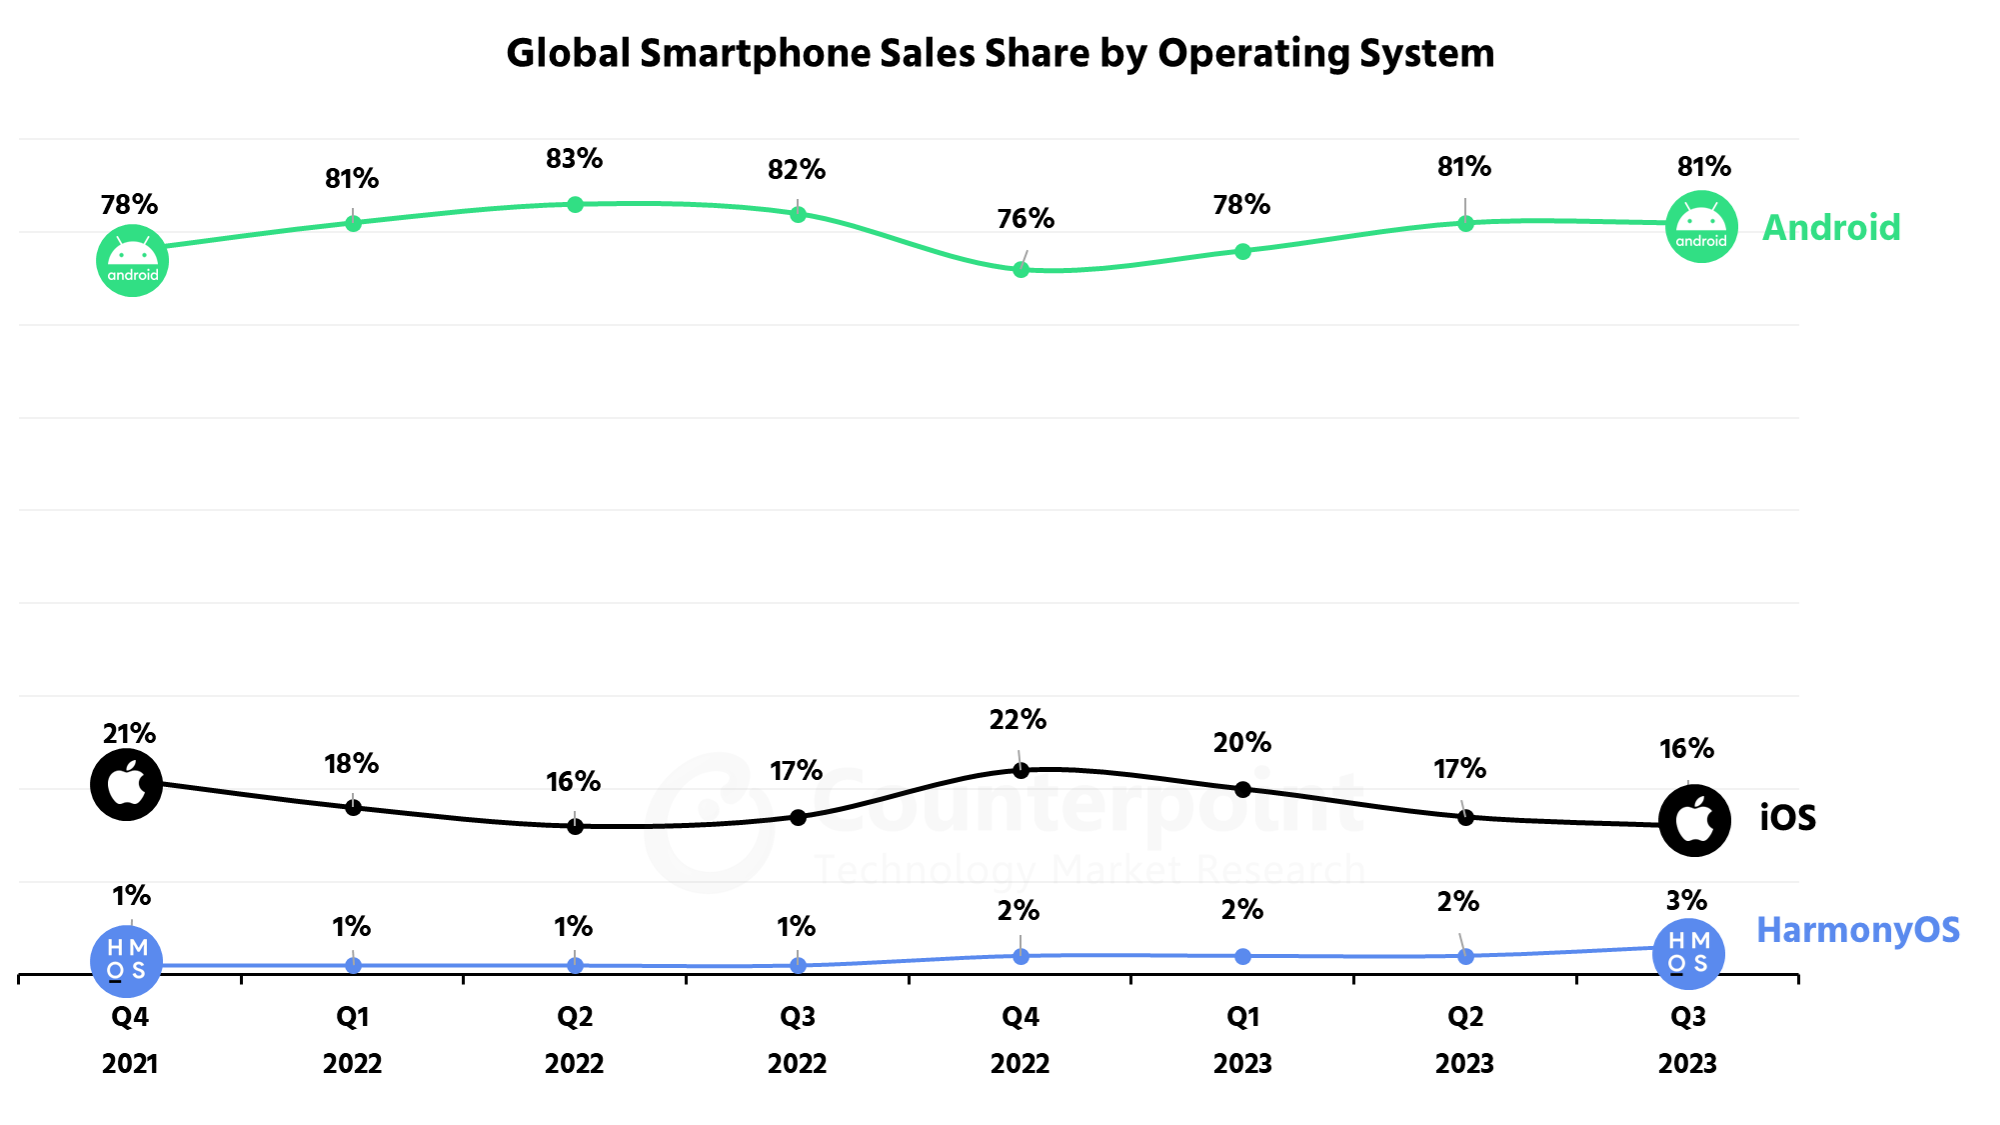 Global Smartphone OS Sales Share Q3 2023